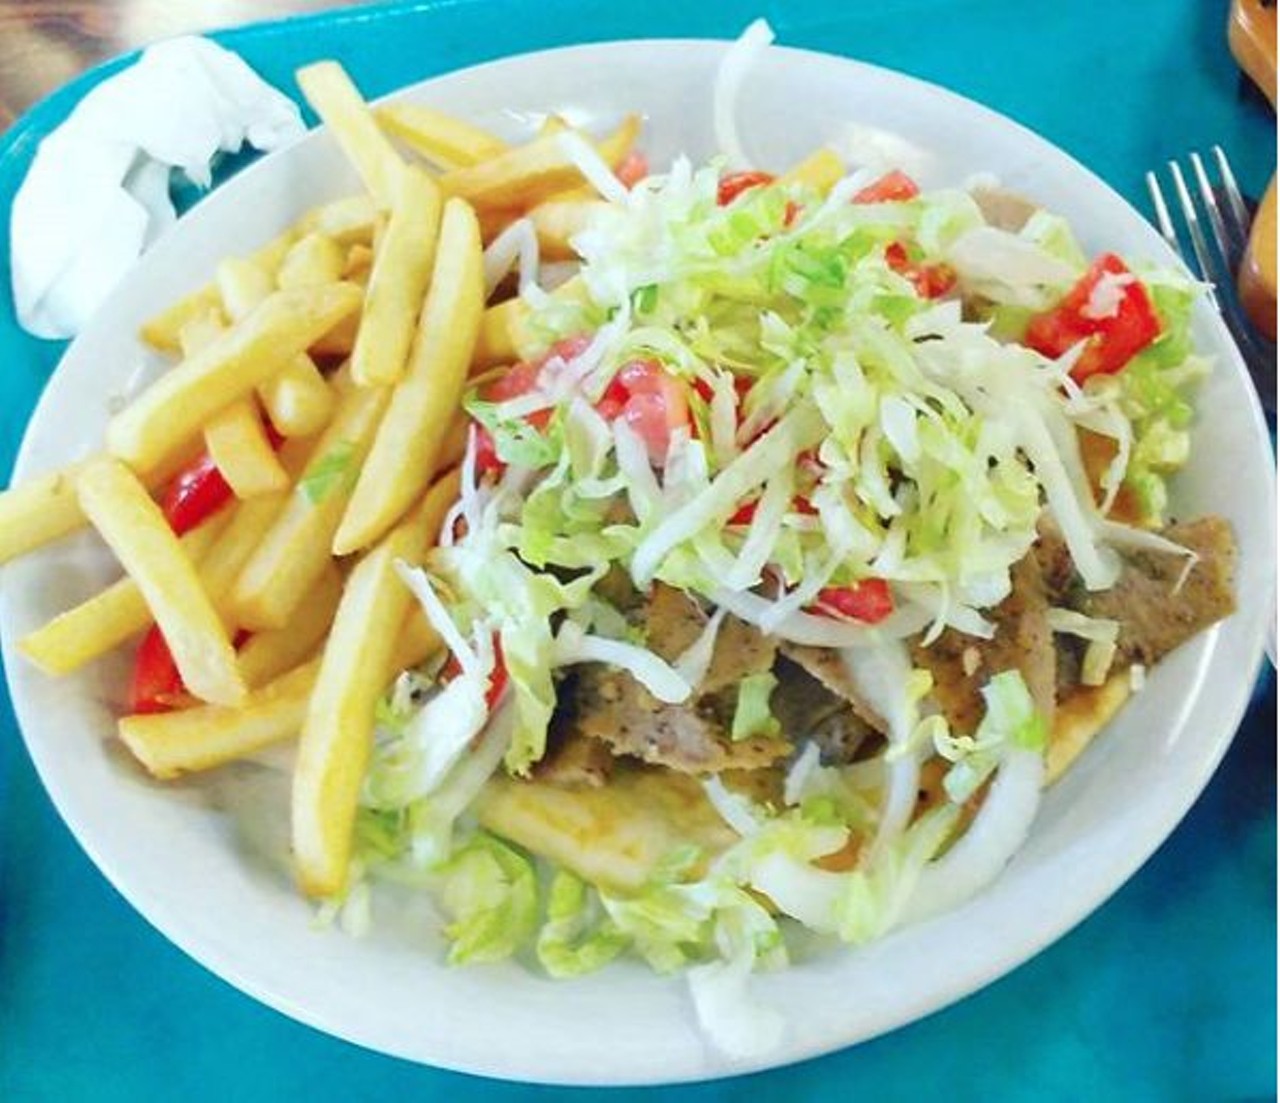  Best Steak & Gyros House
13620 Euclid Ave., (216) 681-1778
This is an East Cleveland staple, and it&#146;s open all day, every day for a one of a kind experience.
Photo via soa_ceo/Instagram